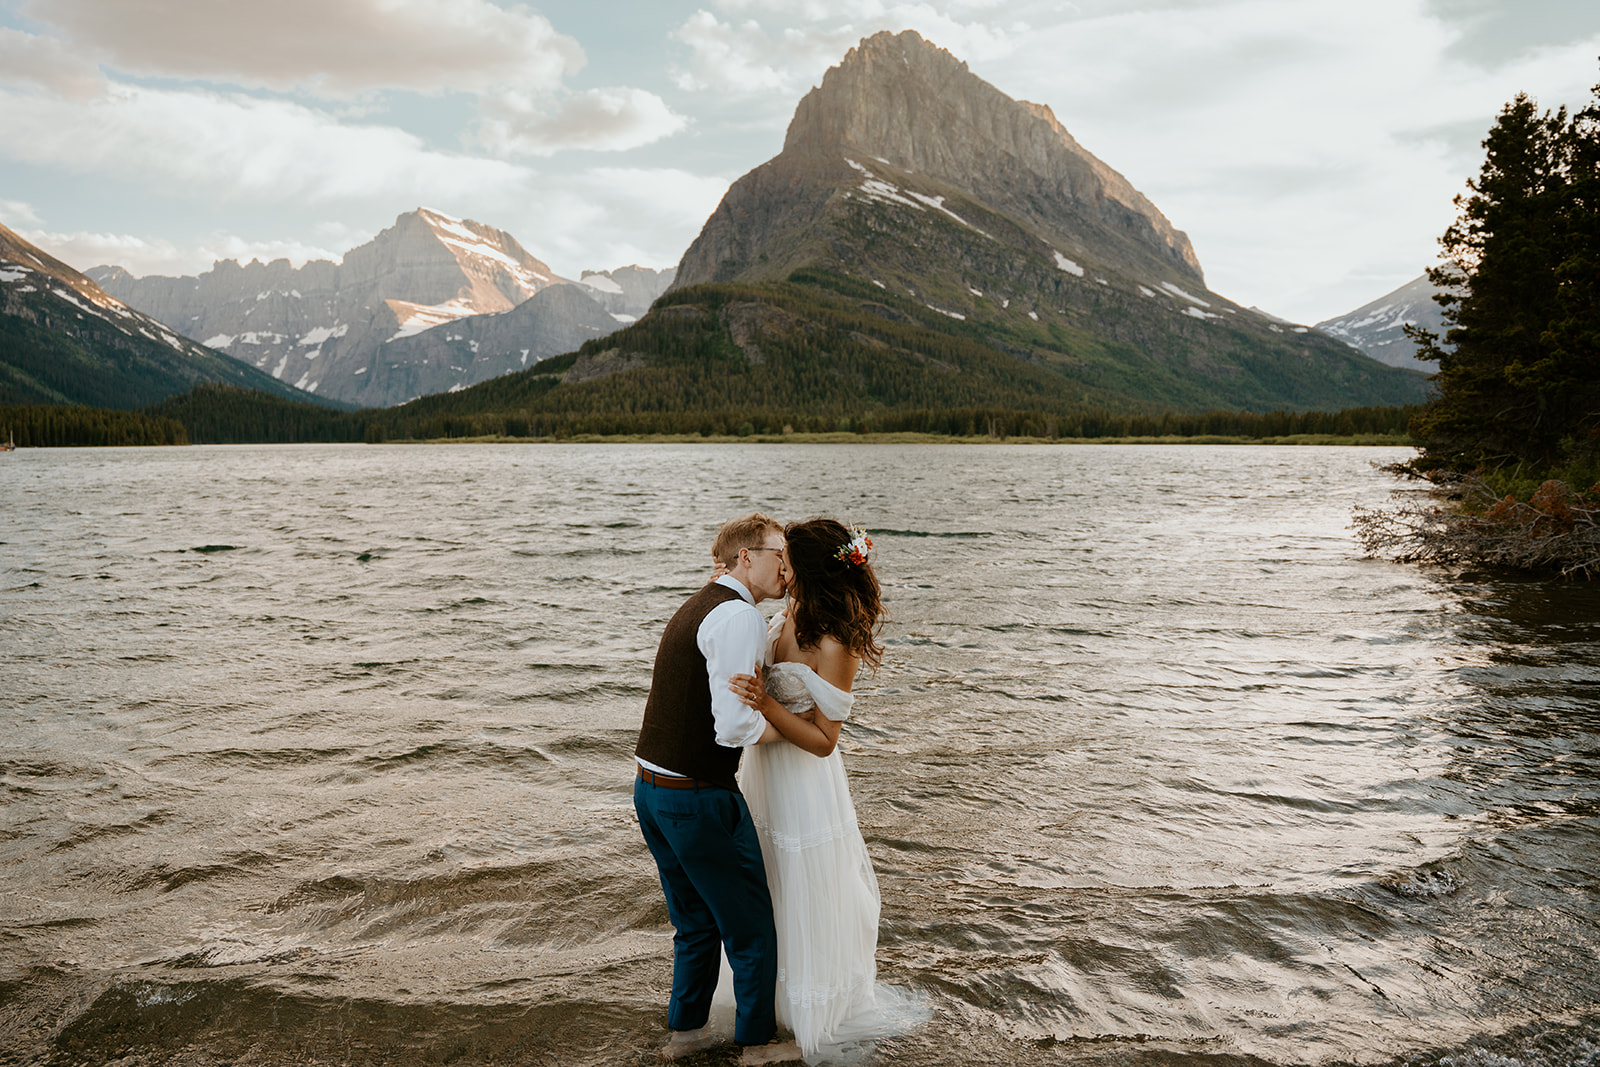 Darcie and Jackson during their intimate elopement in Montana in Glacier National Park in the lake with the beautiful mountains of Many Glacier behind them.